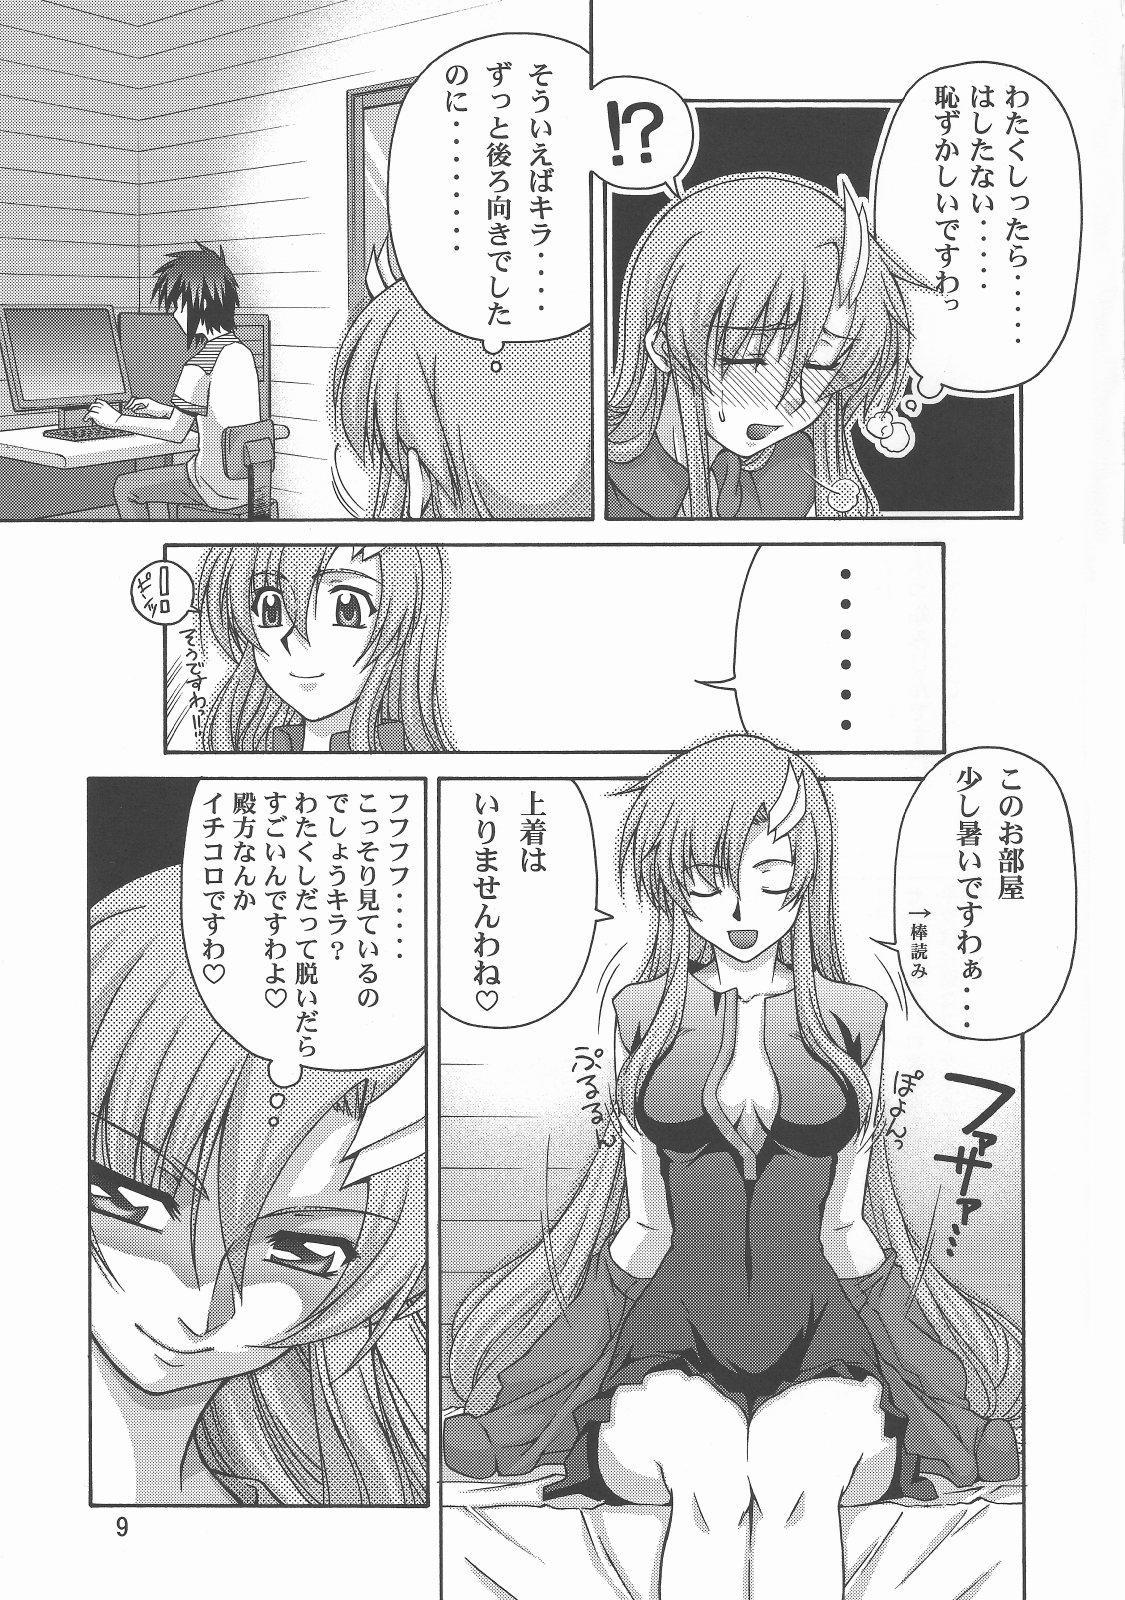 Speculum Thank you! From Gold Rush - Gundam seed destiny Amazing - Page 9